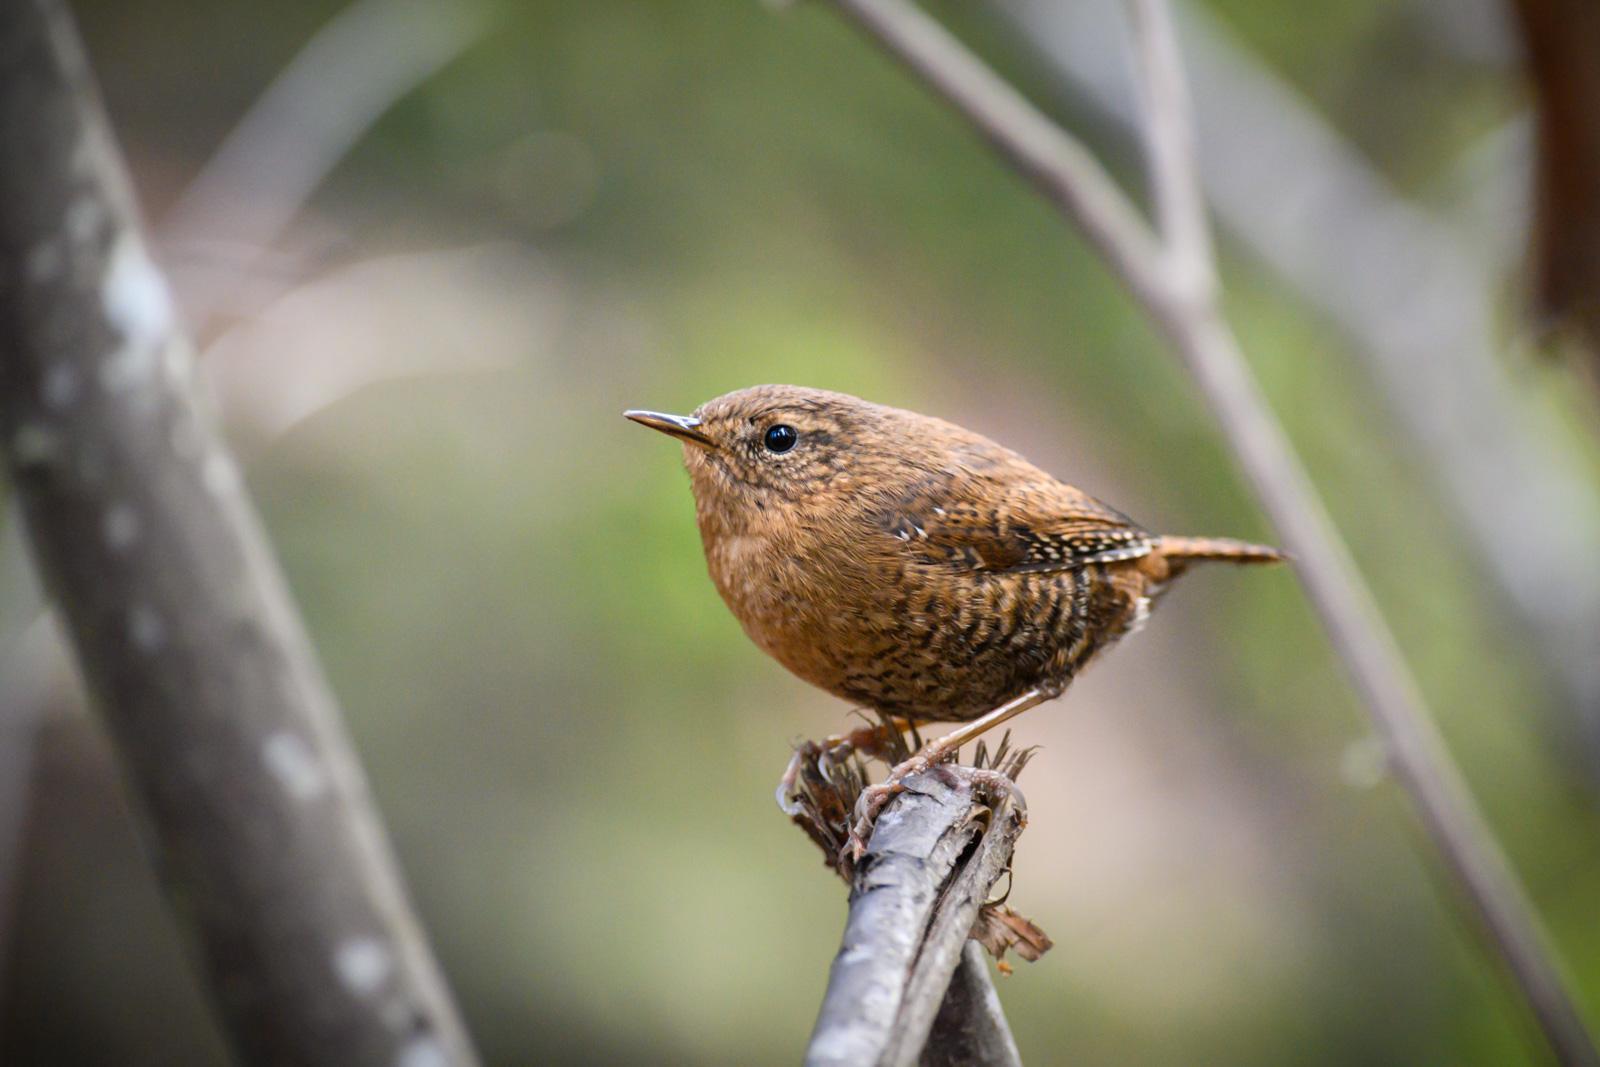 Pacific Wren Photo by Jesse Hodges